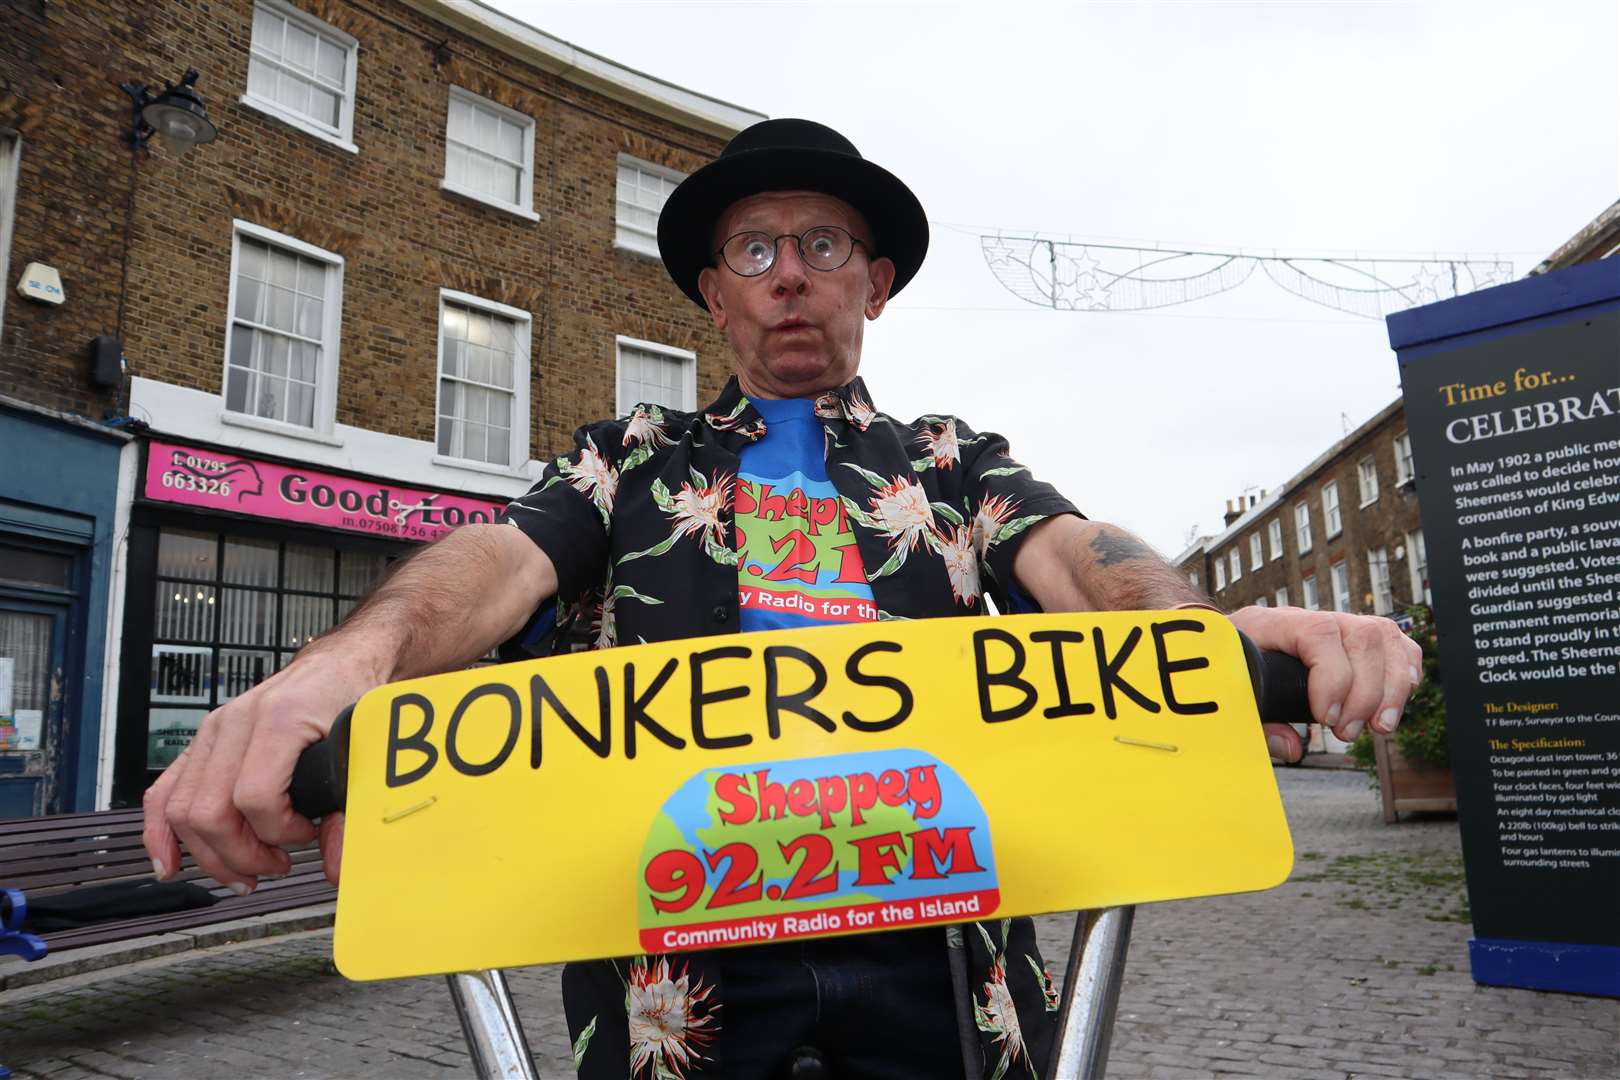 Sheppey entertainer William Wallace, 74, will be launching his Bonkers Bike Challenge at Sheerness town centre on Saturday at 10am